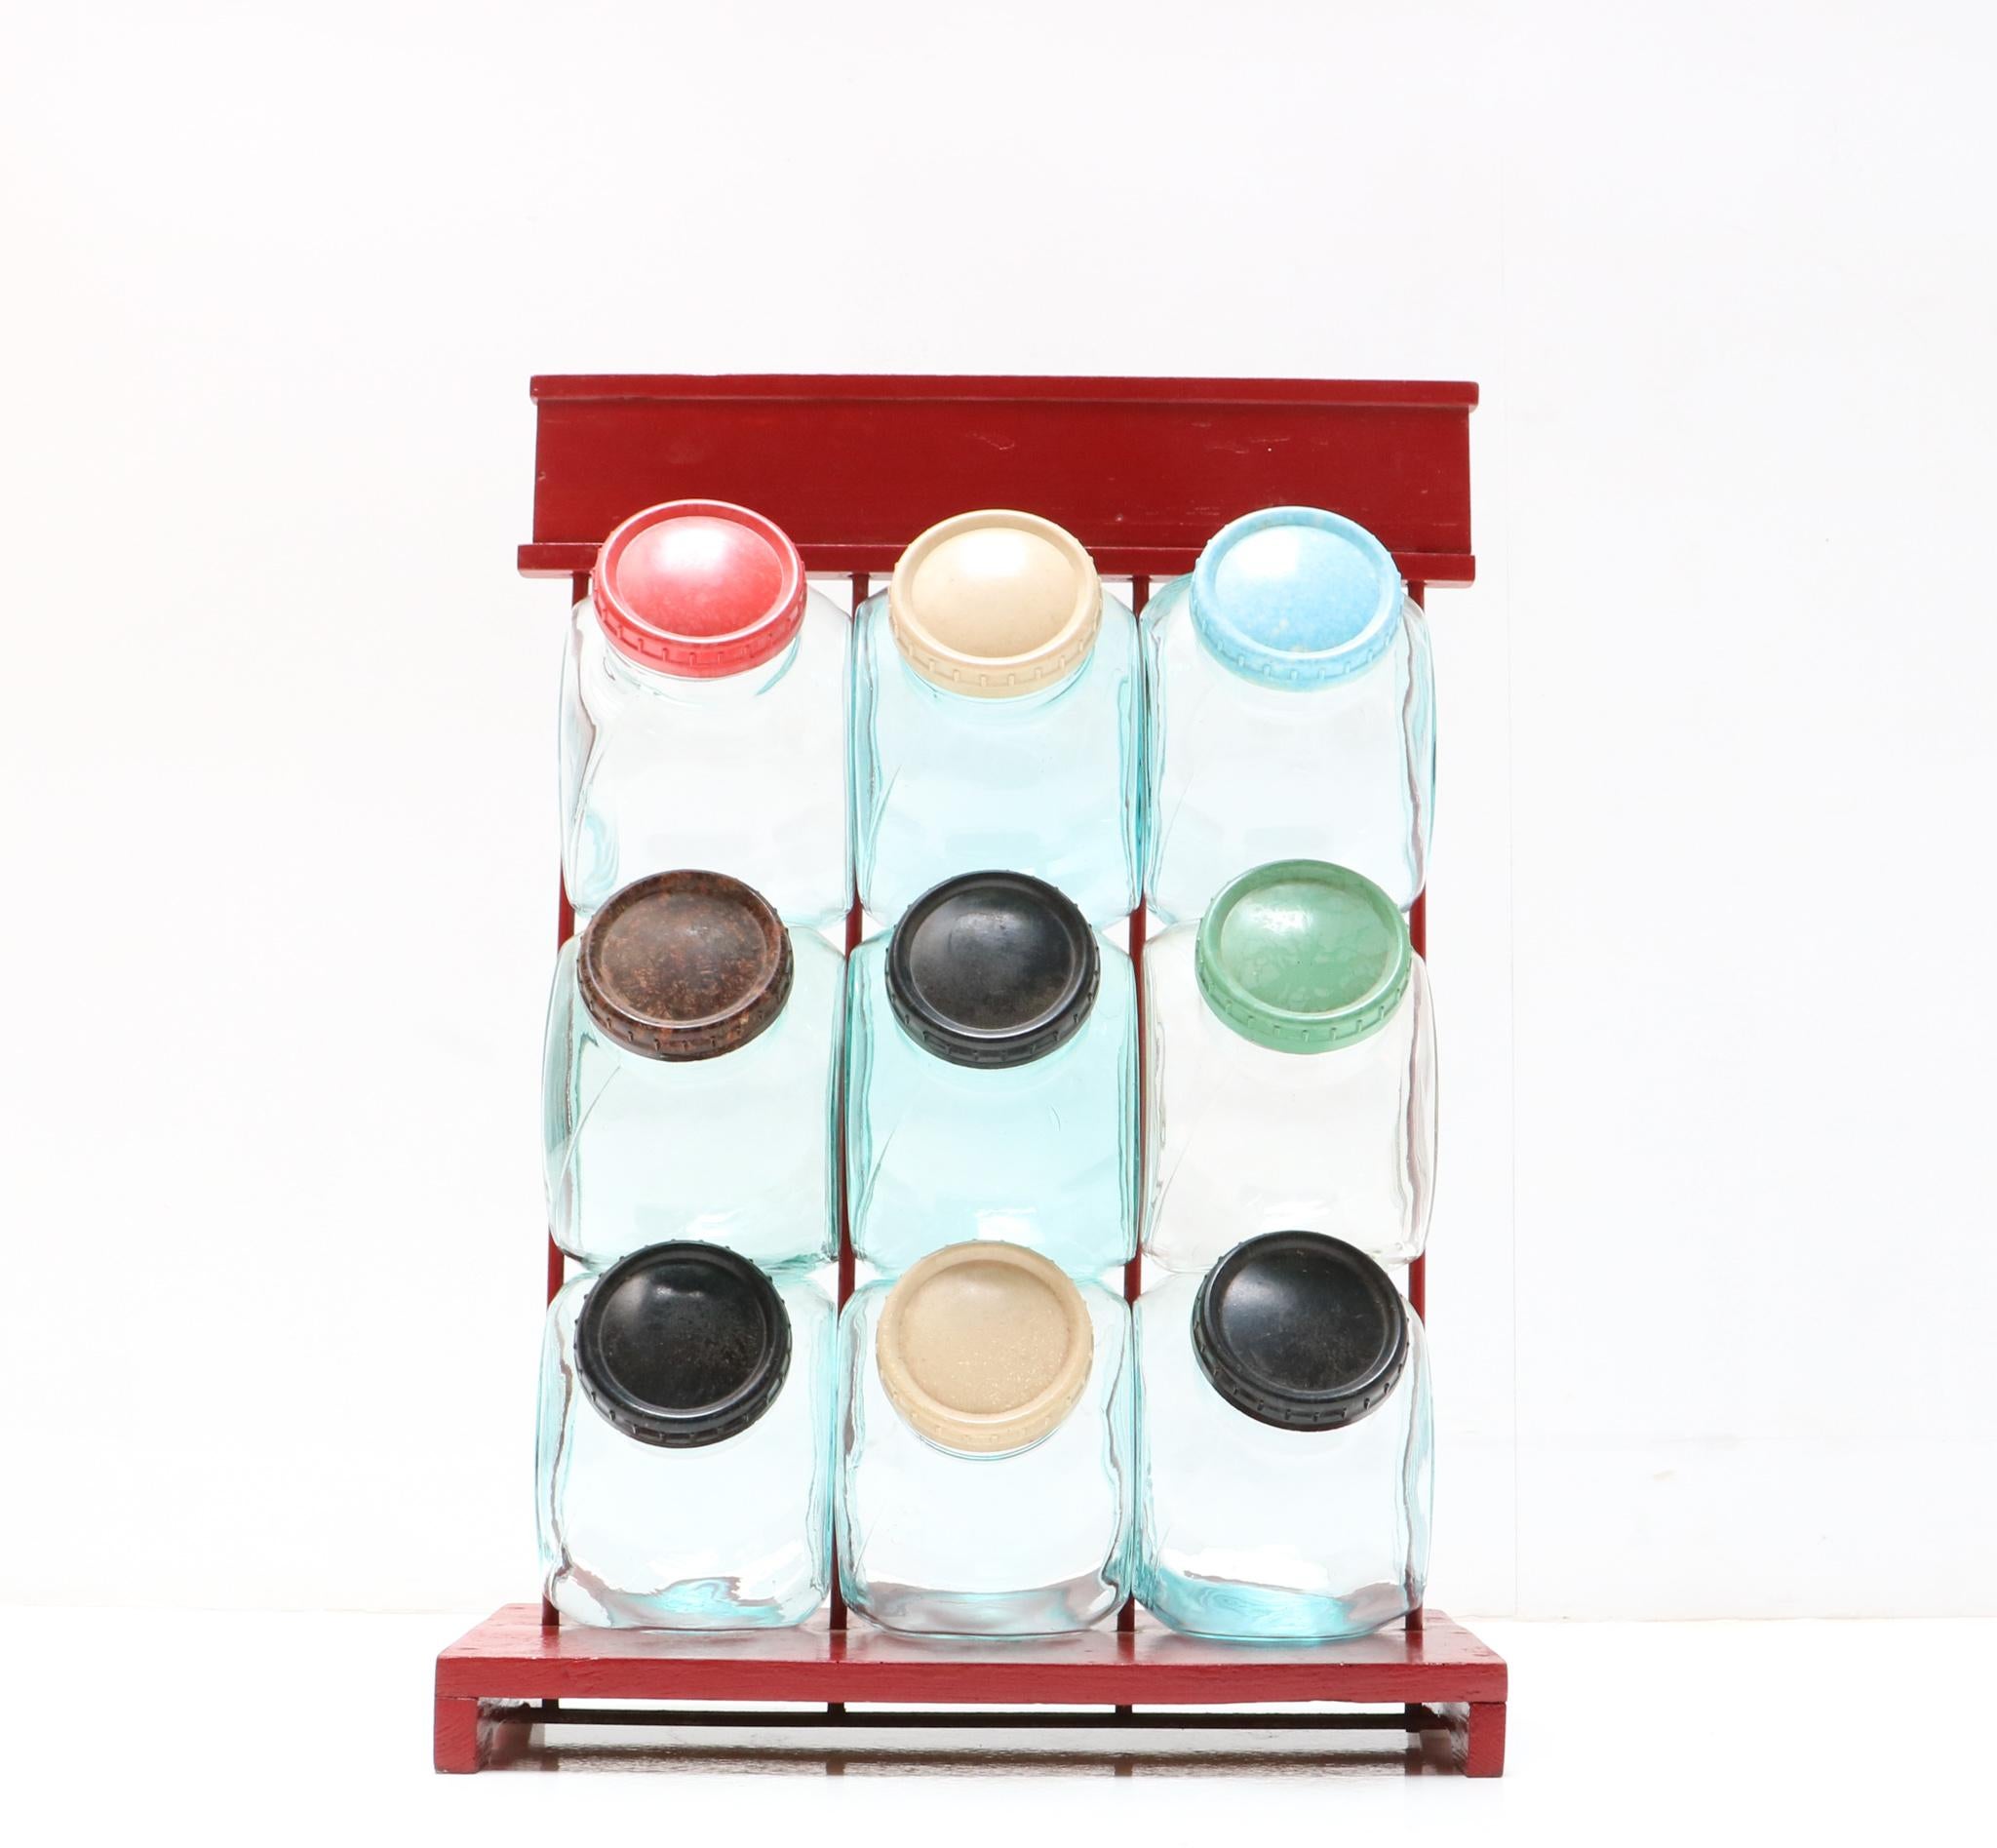 Stunning and rare Vintage shop display stand with nine jars.
Striking German design from the 1950s.
Antique red painted wood and metal frame with nine original
hand-blown glass jars with multi-colored original bakelite lids.
This wonderful